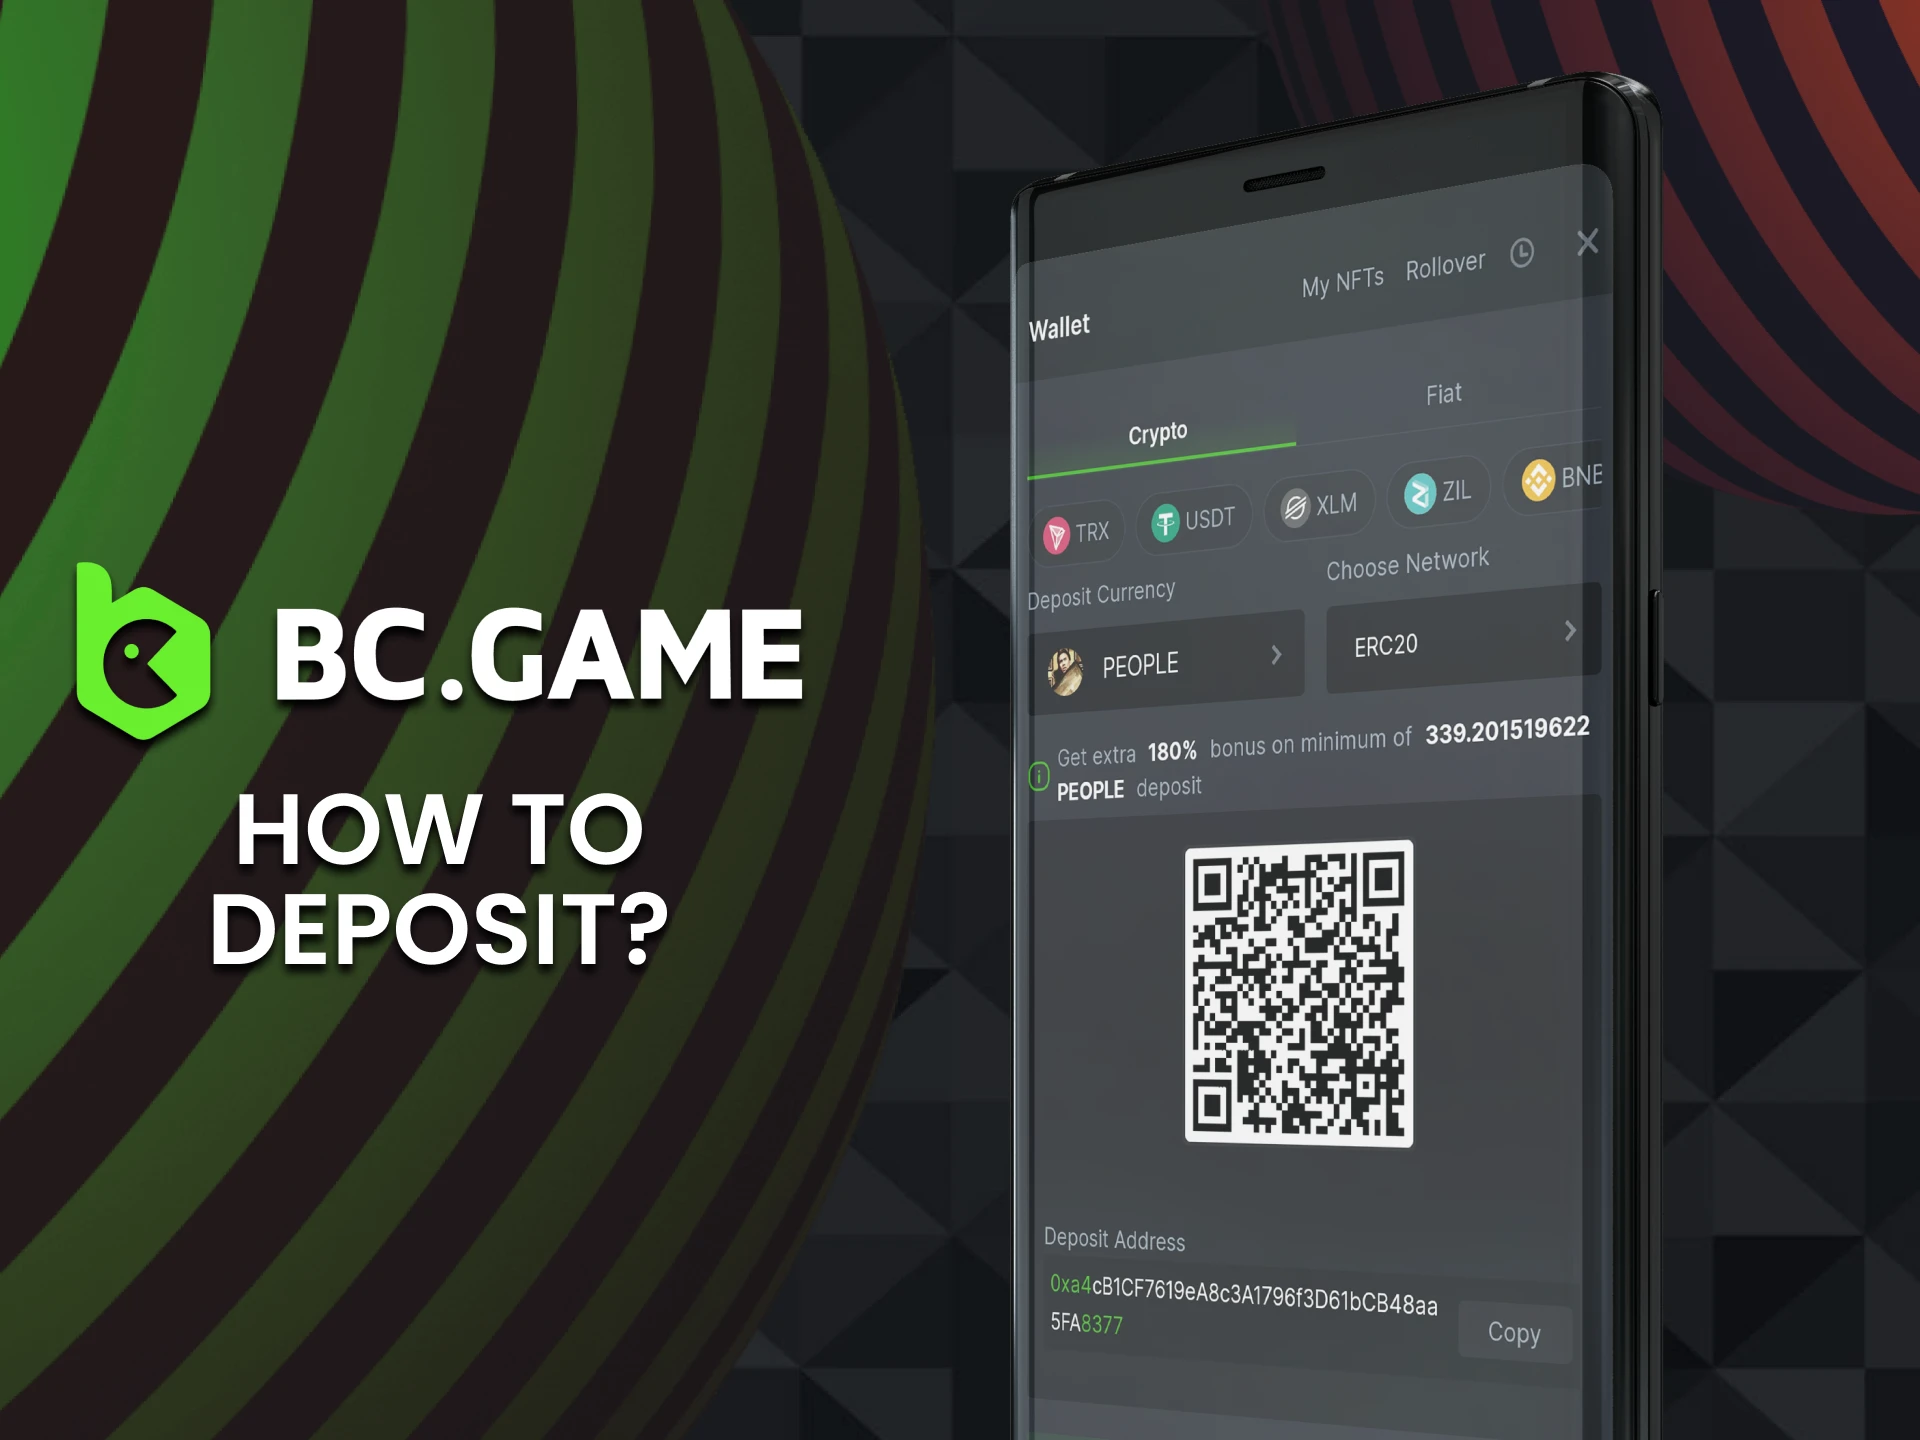 Find out how to deposit via BC Game application.